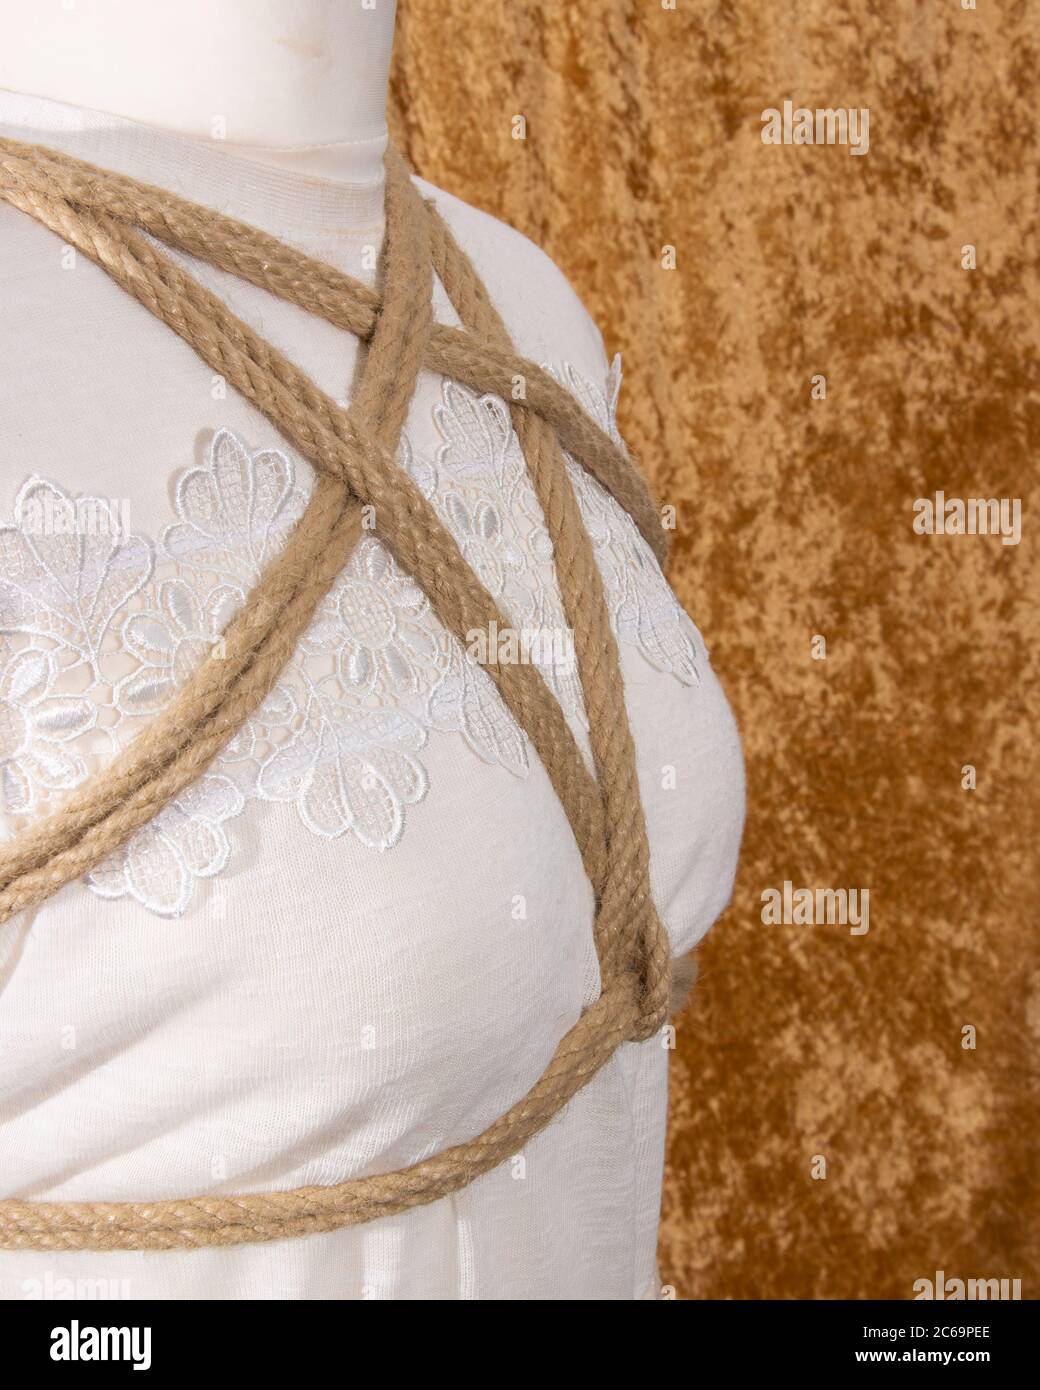 Selective focus of shibari pentagram chest harness on side view of manikin Stock Photo